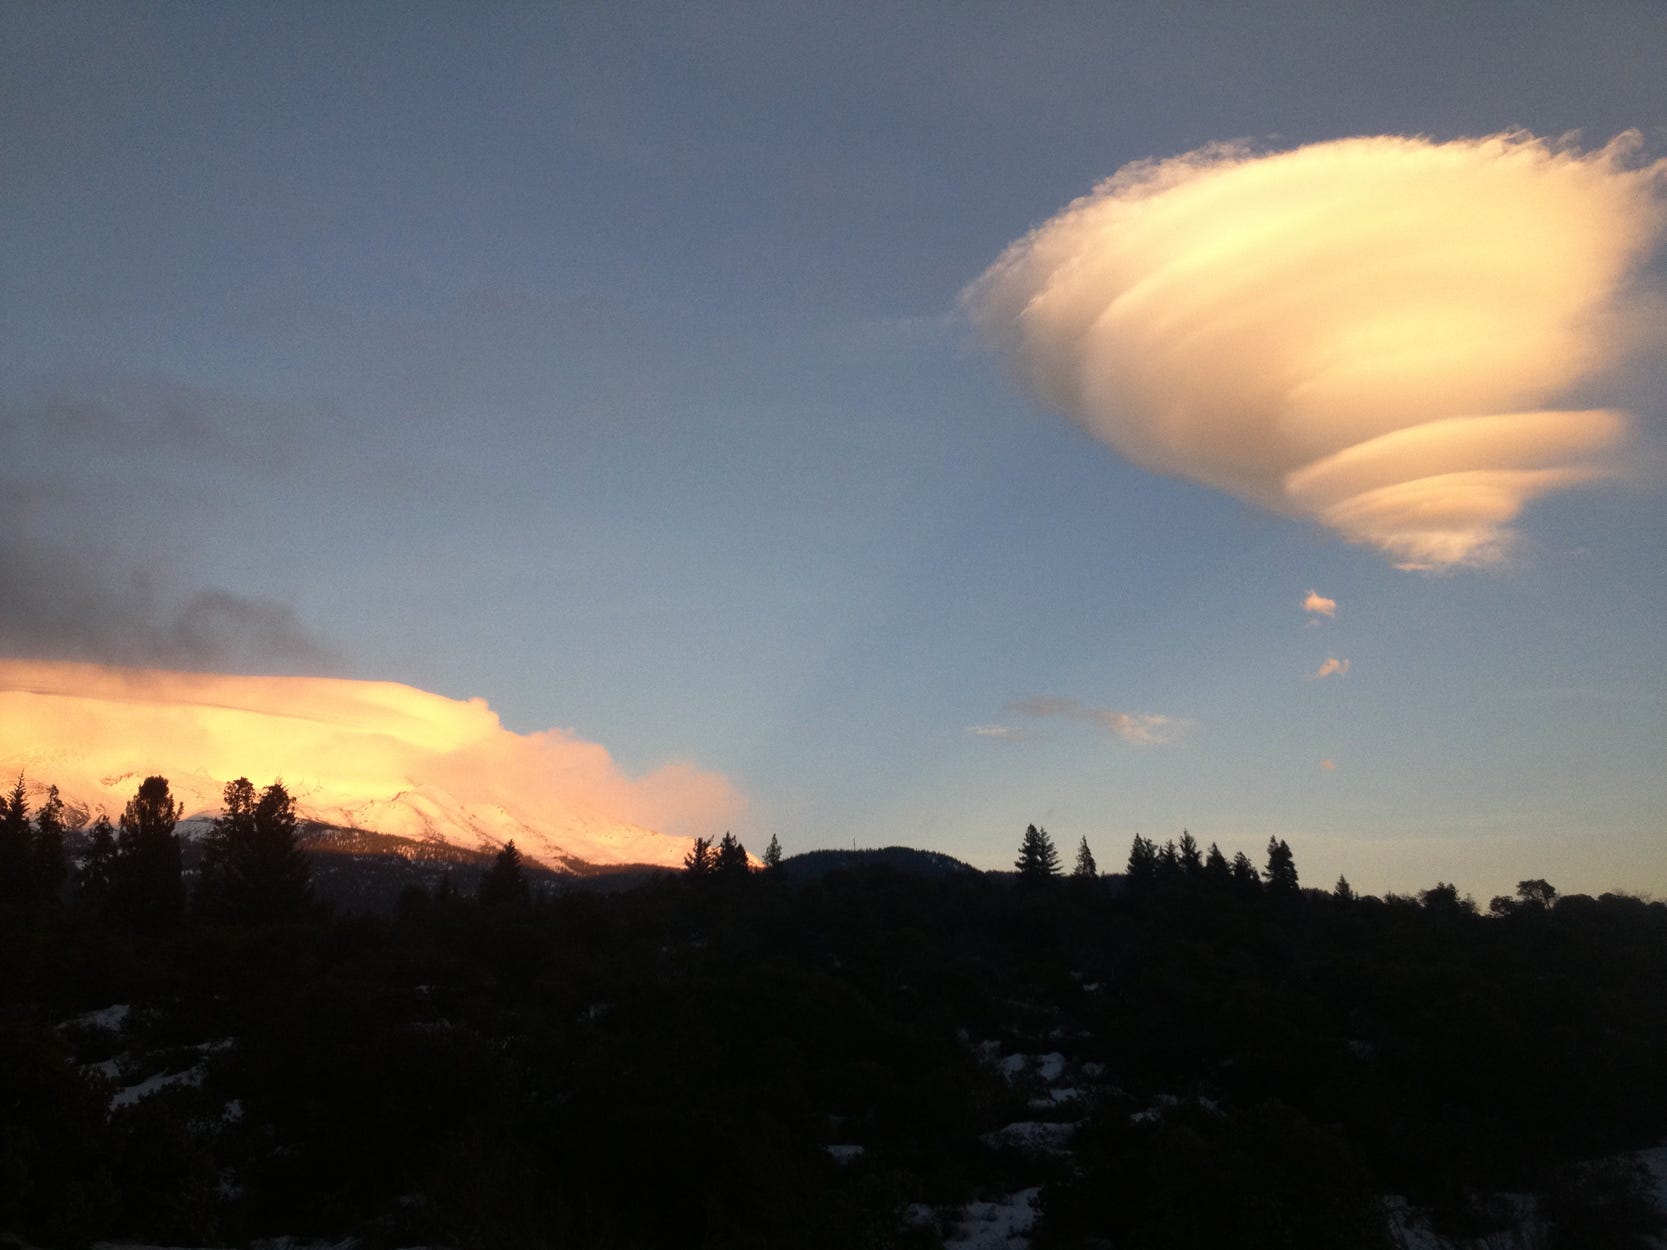 A lenticular approaches Mt. Shasta, which is covered by another lenticular cloud.